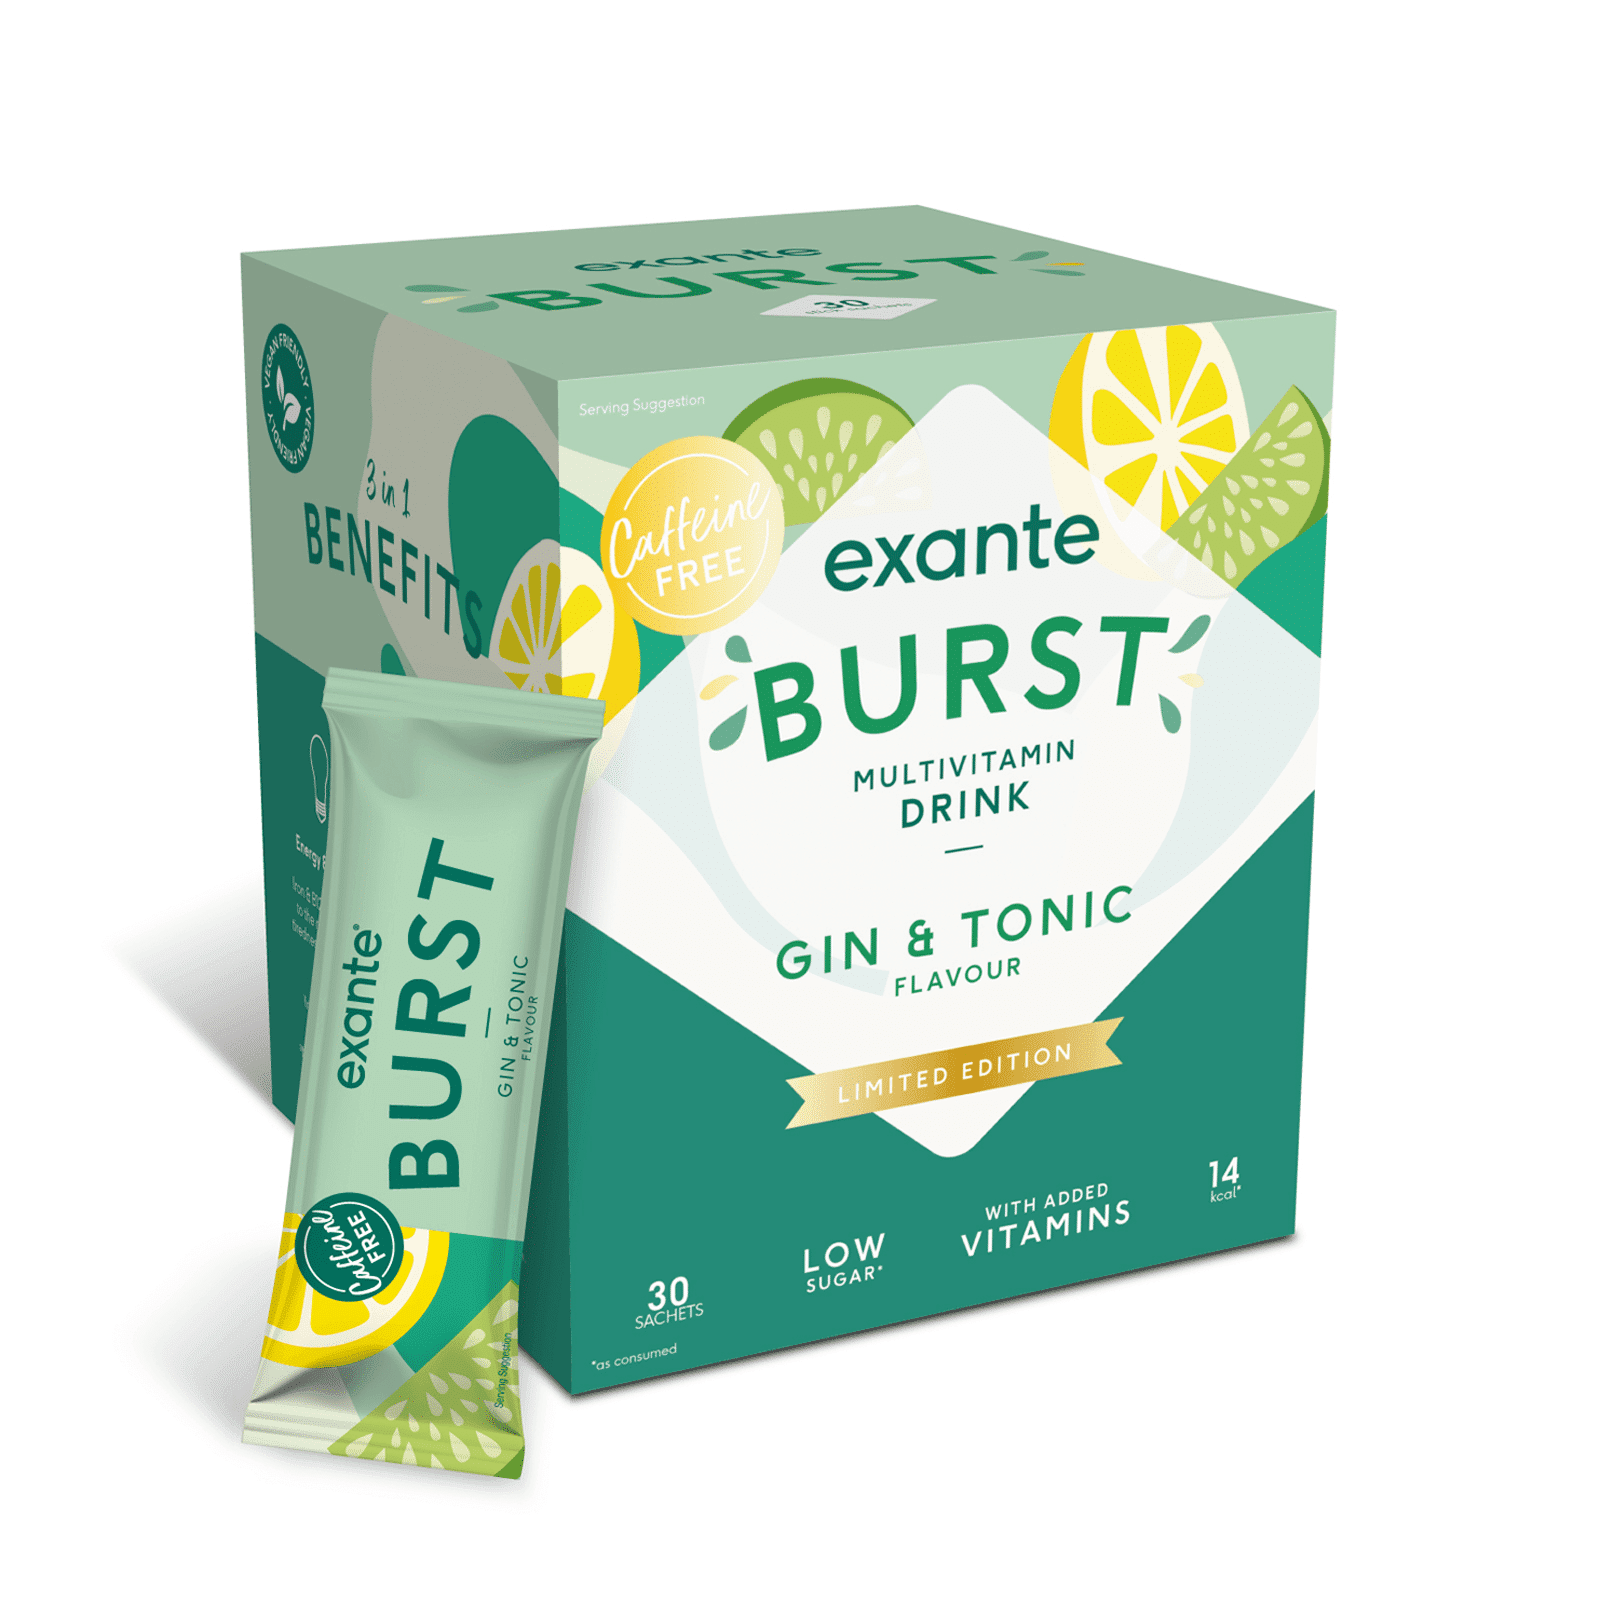 Exante Diet Limited Edition Gin & Tonic BURST Box of 30